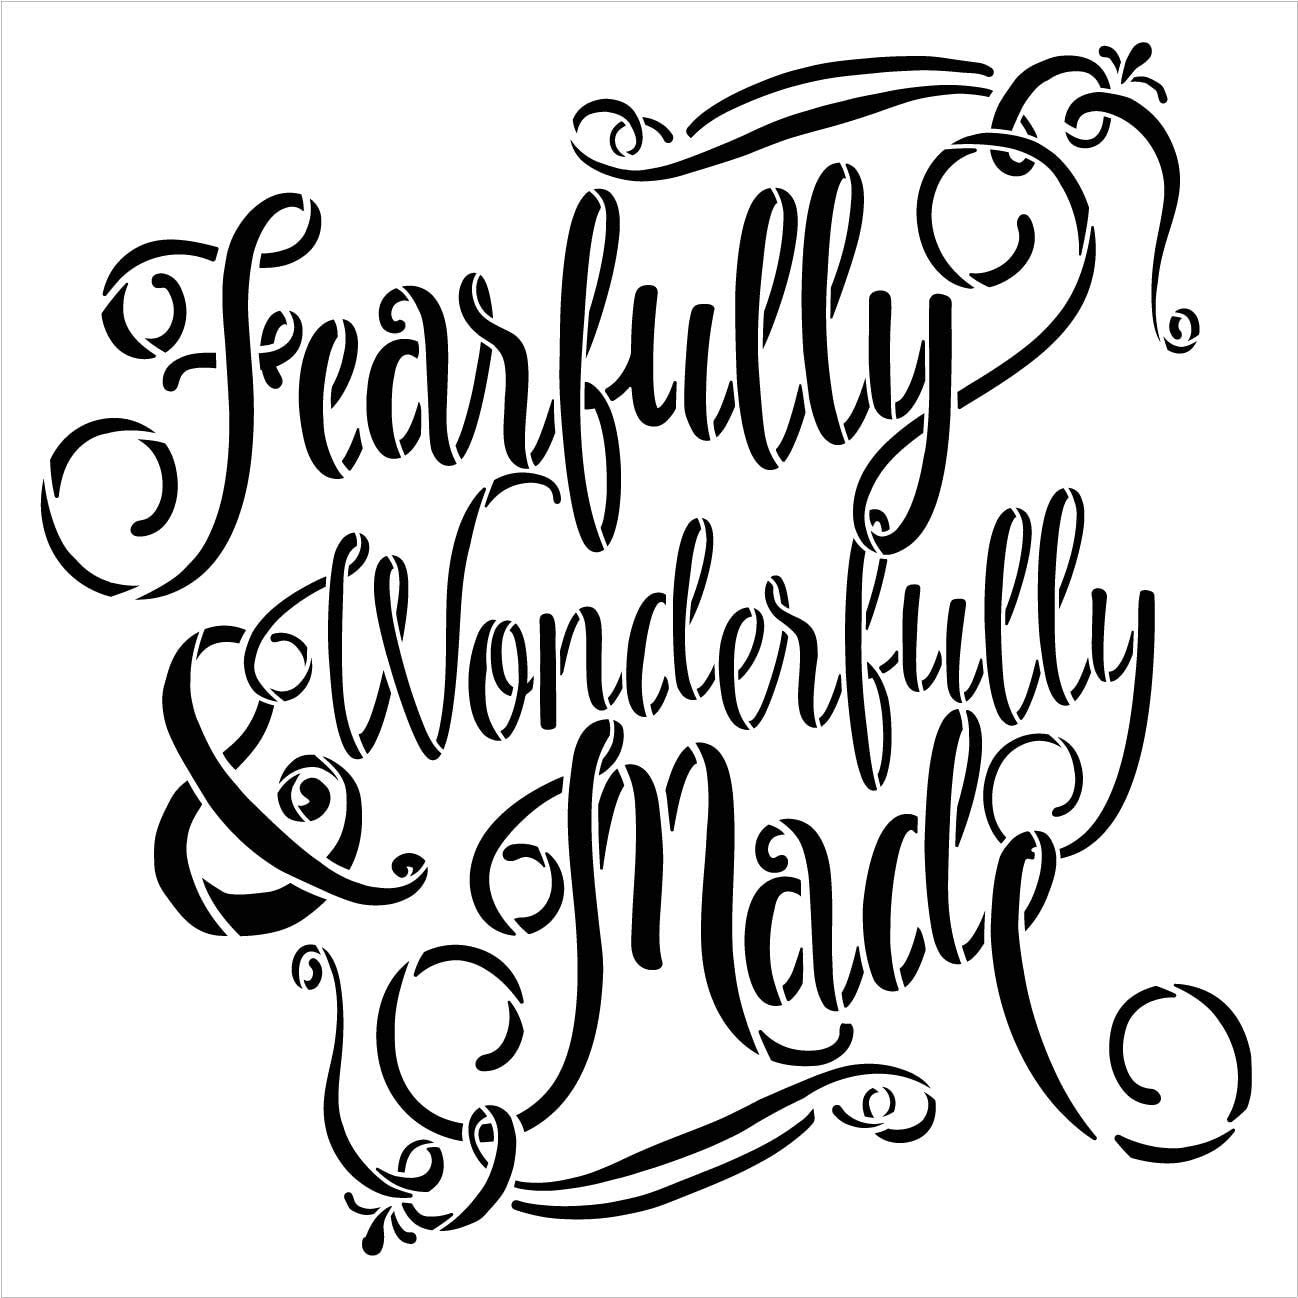 Fearfully & Wonderfully Made Stencil by StudioR12 | DIY Faith Home Decor | Craft and Paint Wood Sign | Reusable Mylar Template | Bible Verse Cursive Script Gift | Select Size